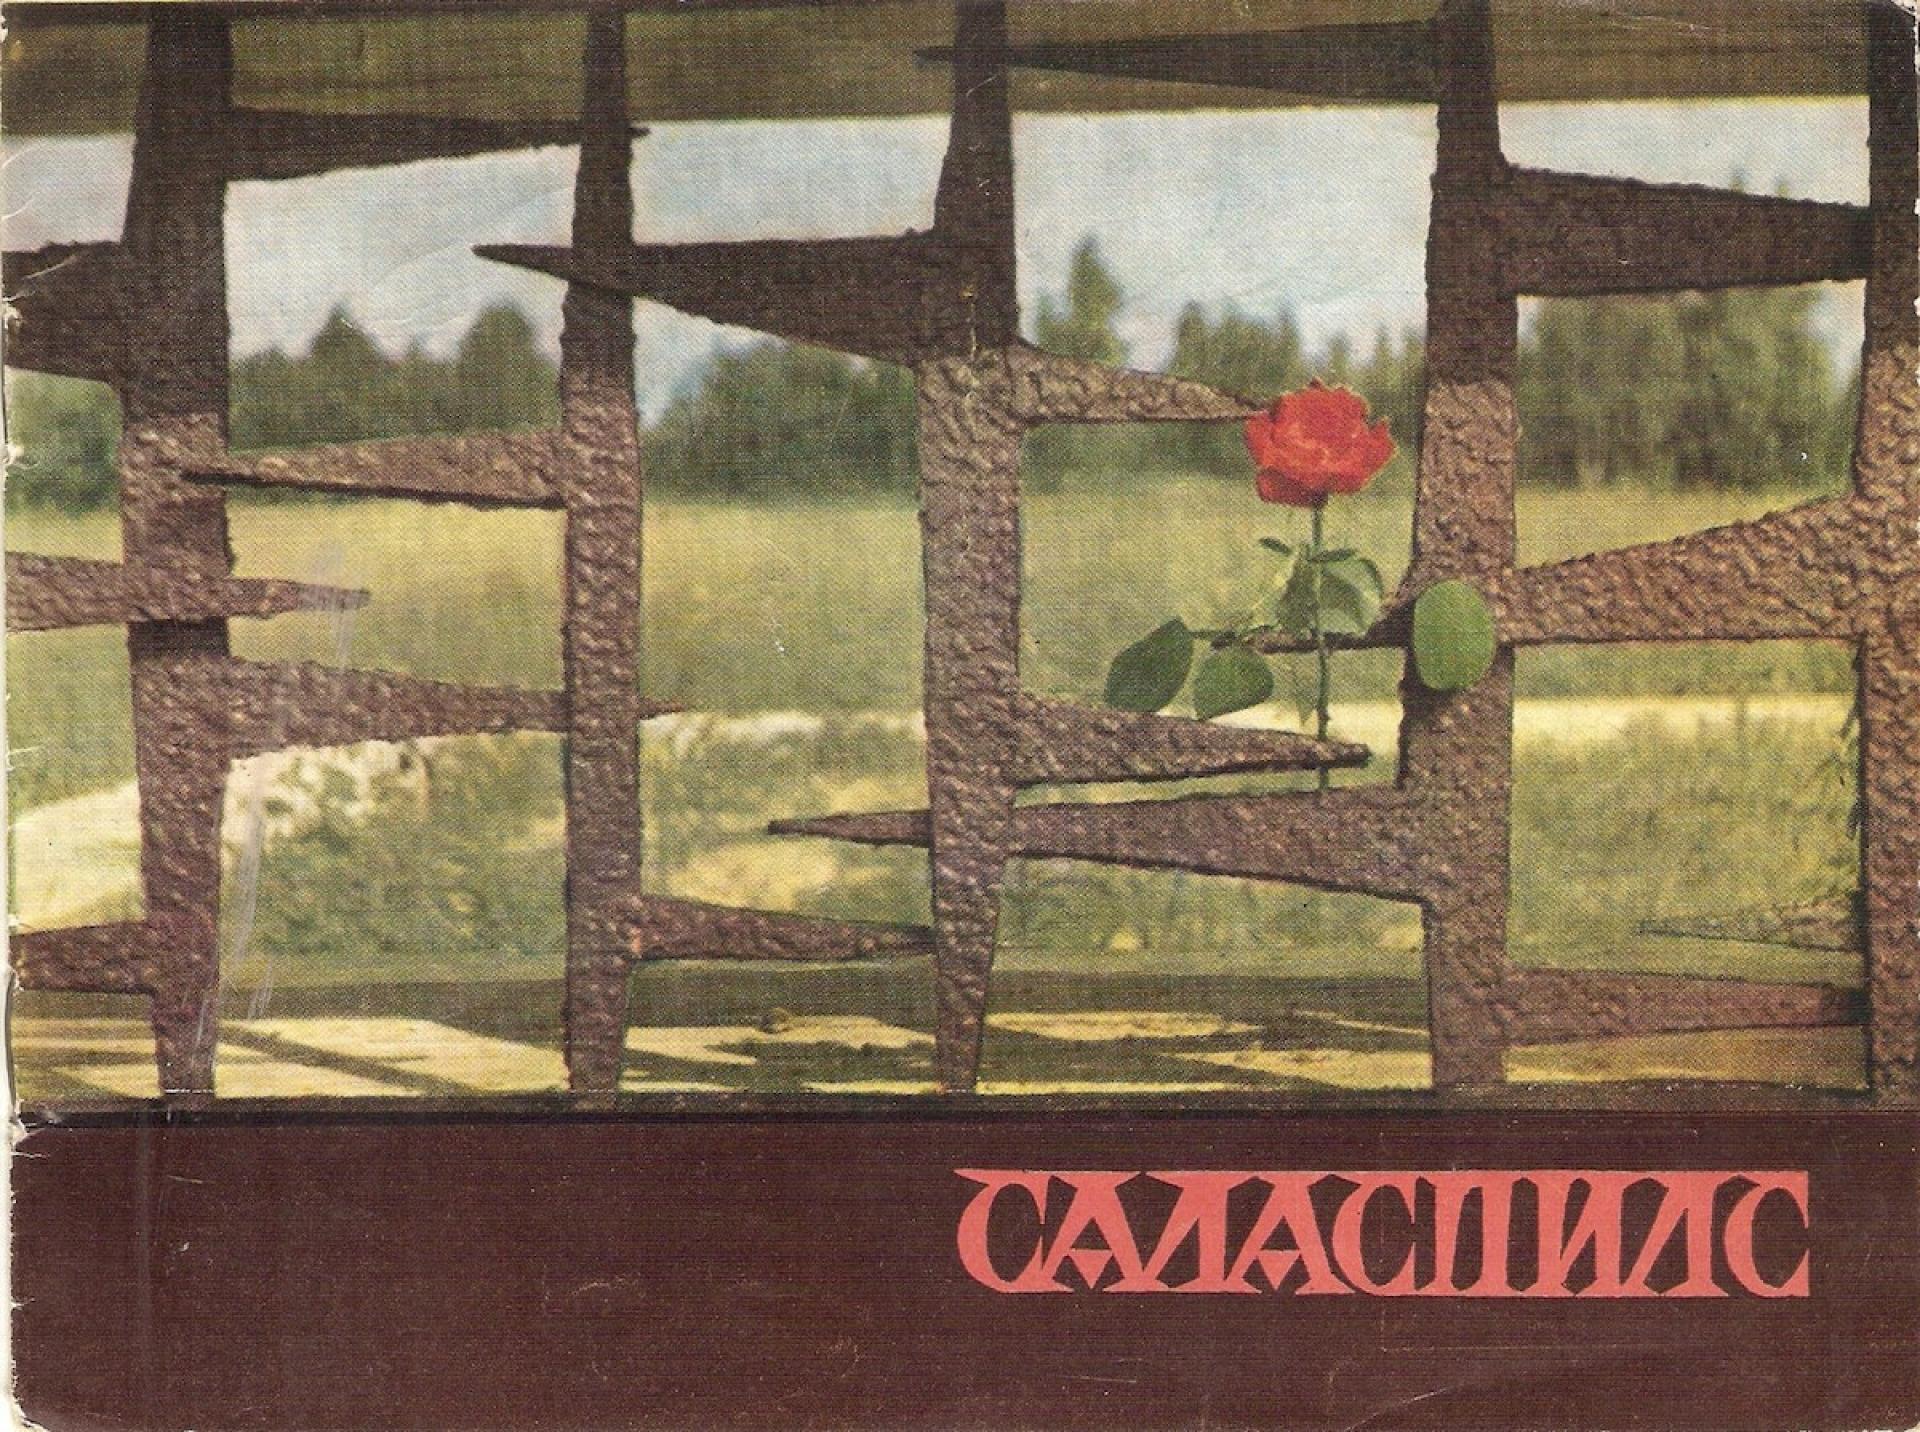 The cover of a 1969 commemorative book about Salaspils.